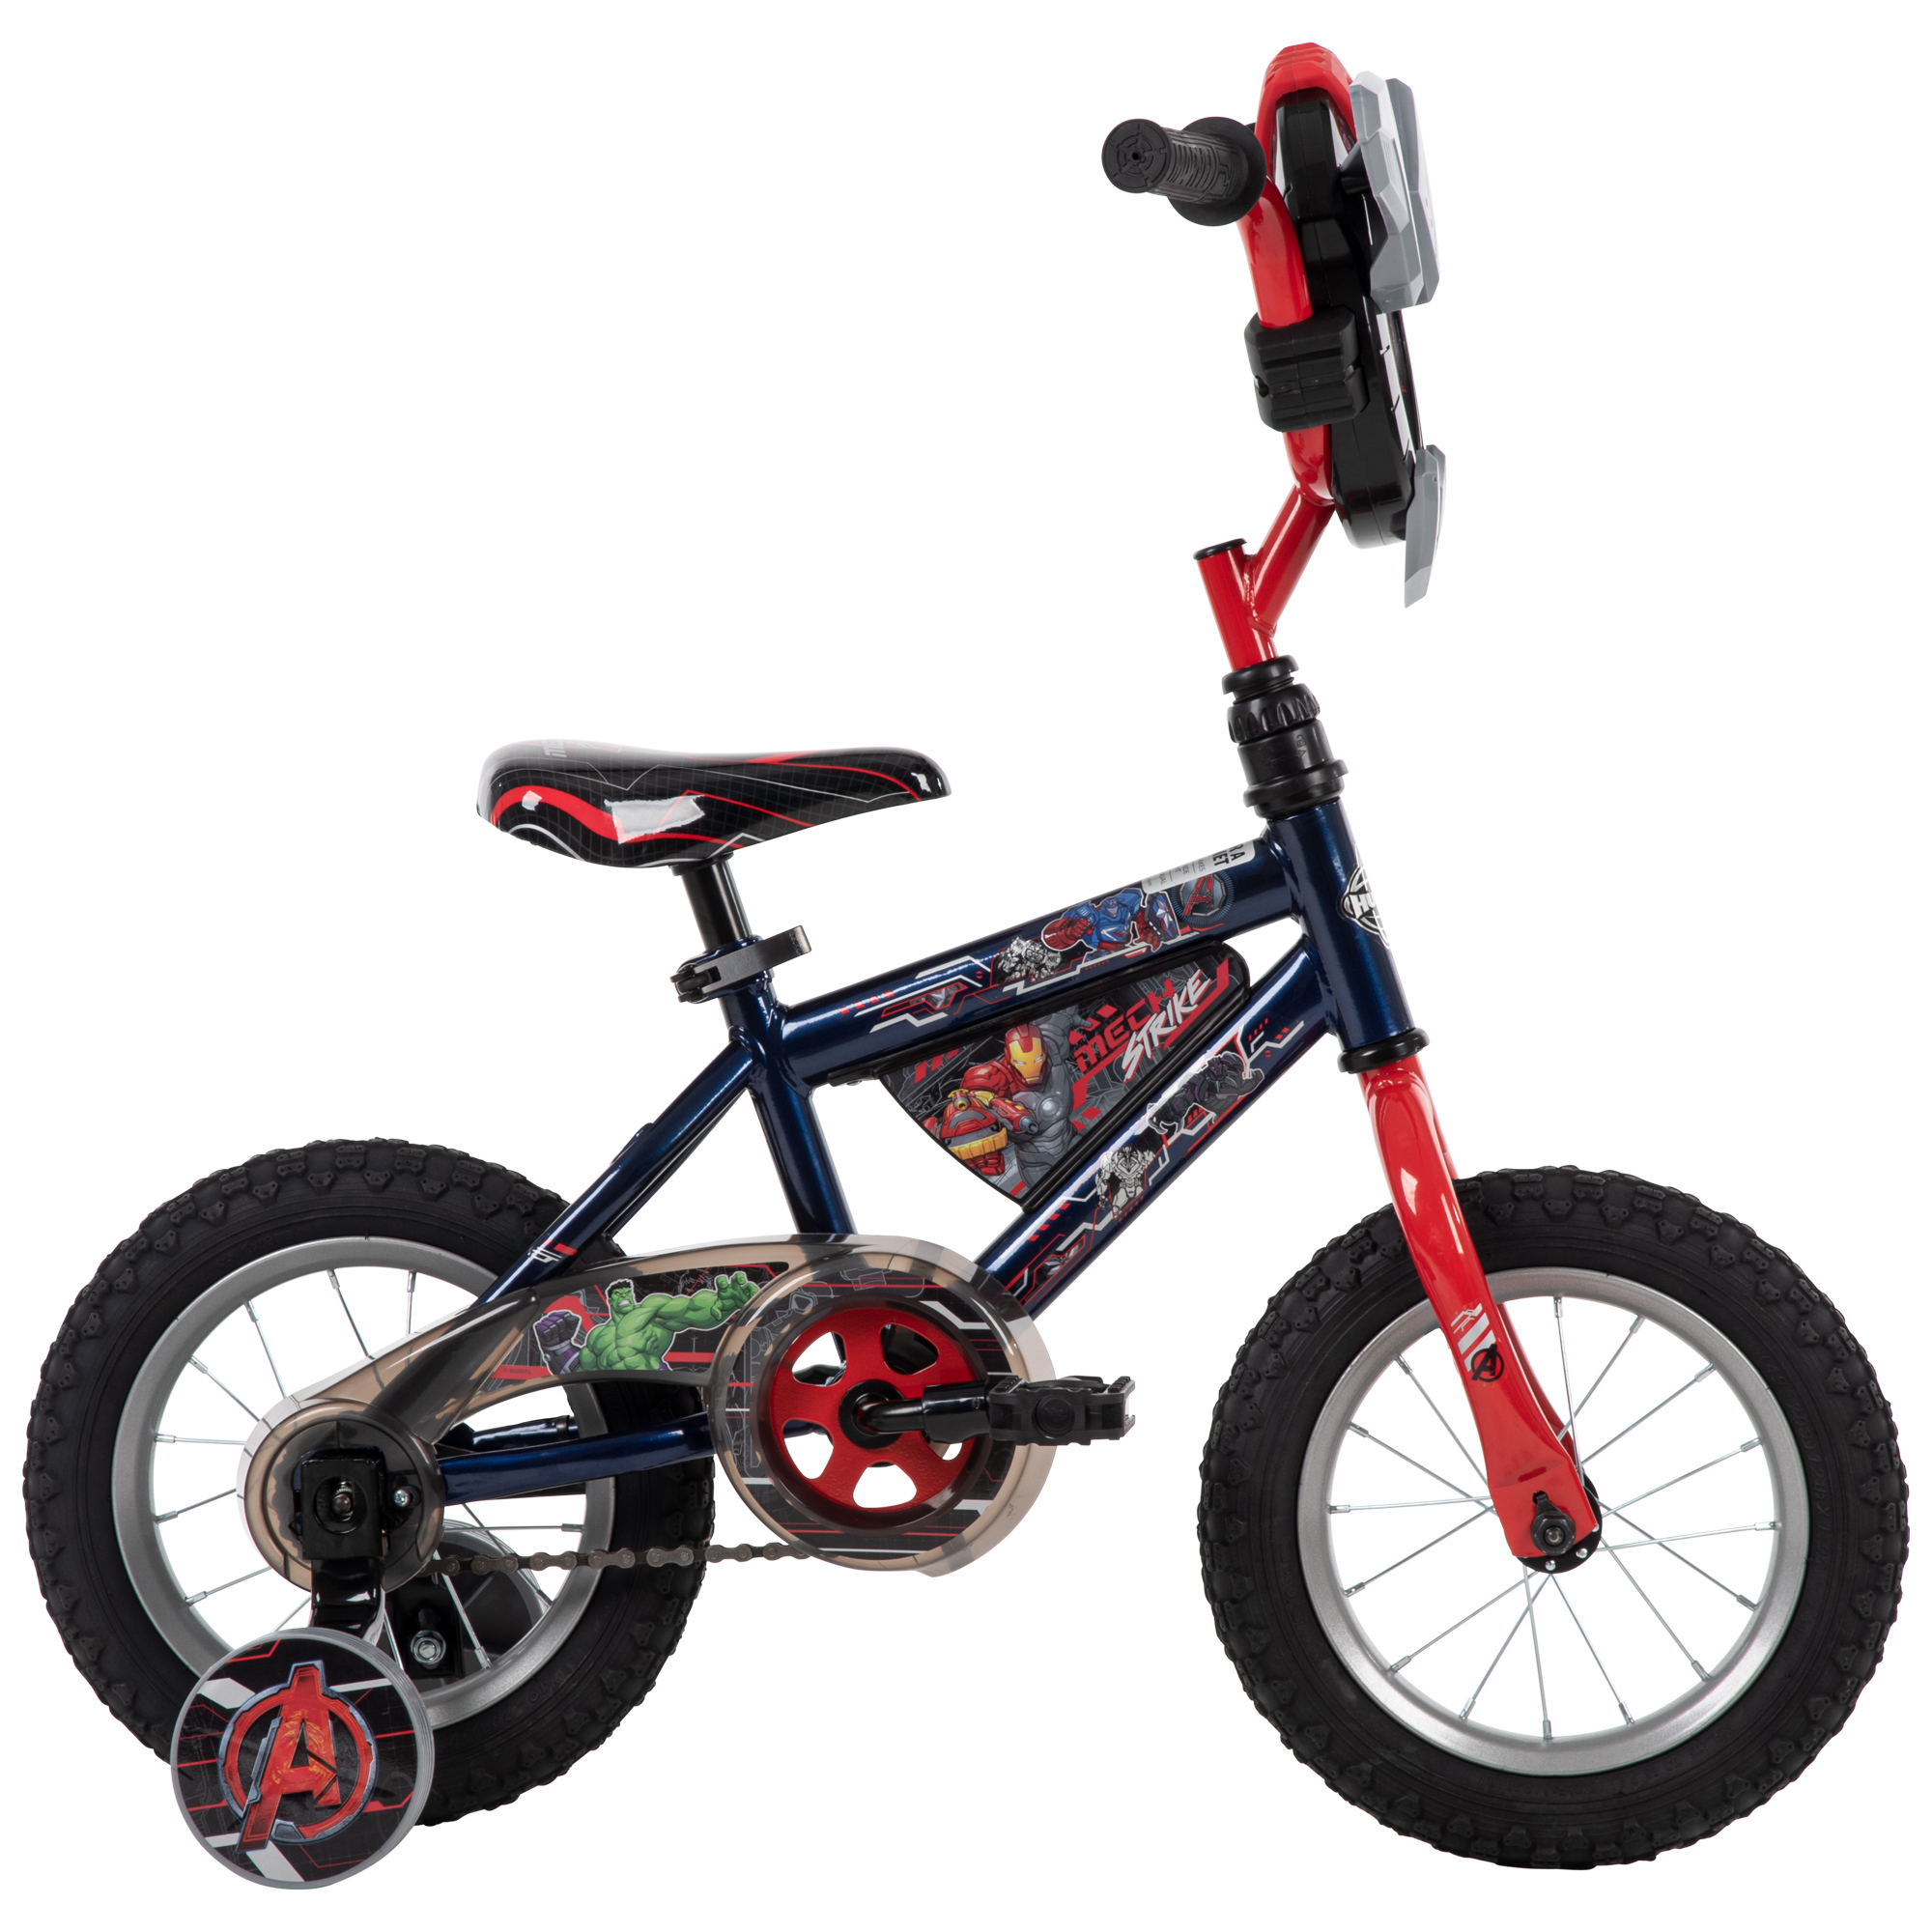 Marvel® Avengers® 12-inch Single-Speed Bicycle for Boys, by Huffy, Blue - image 4 of 19